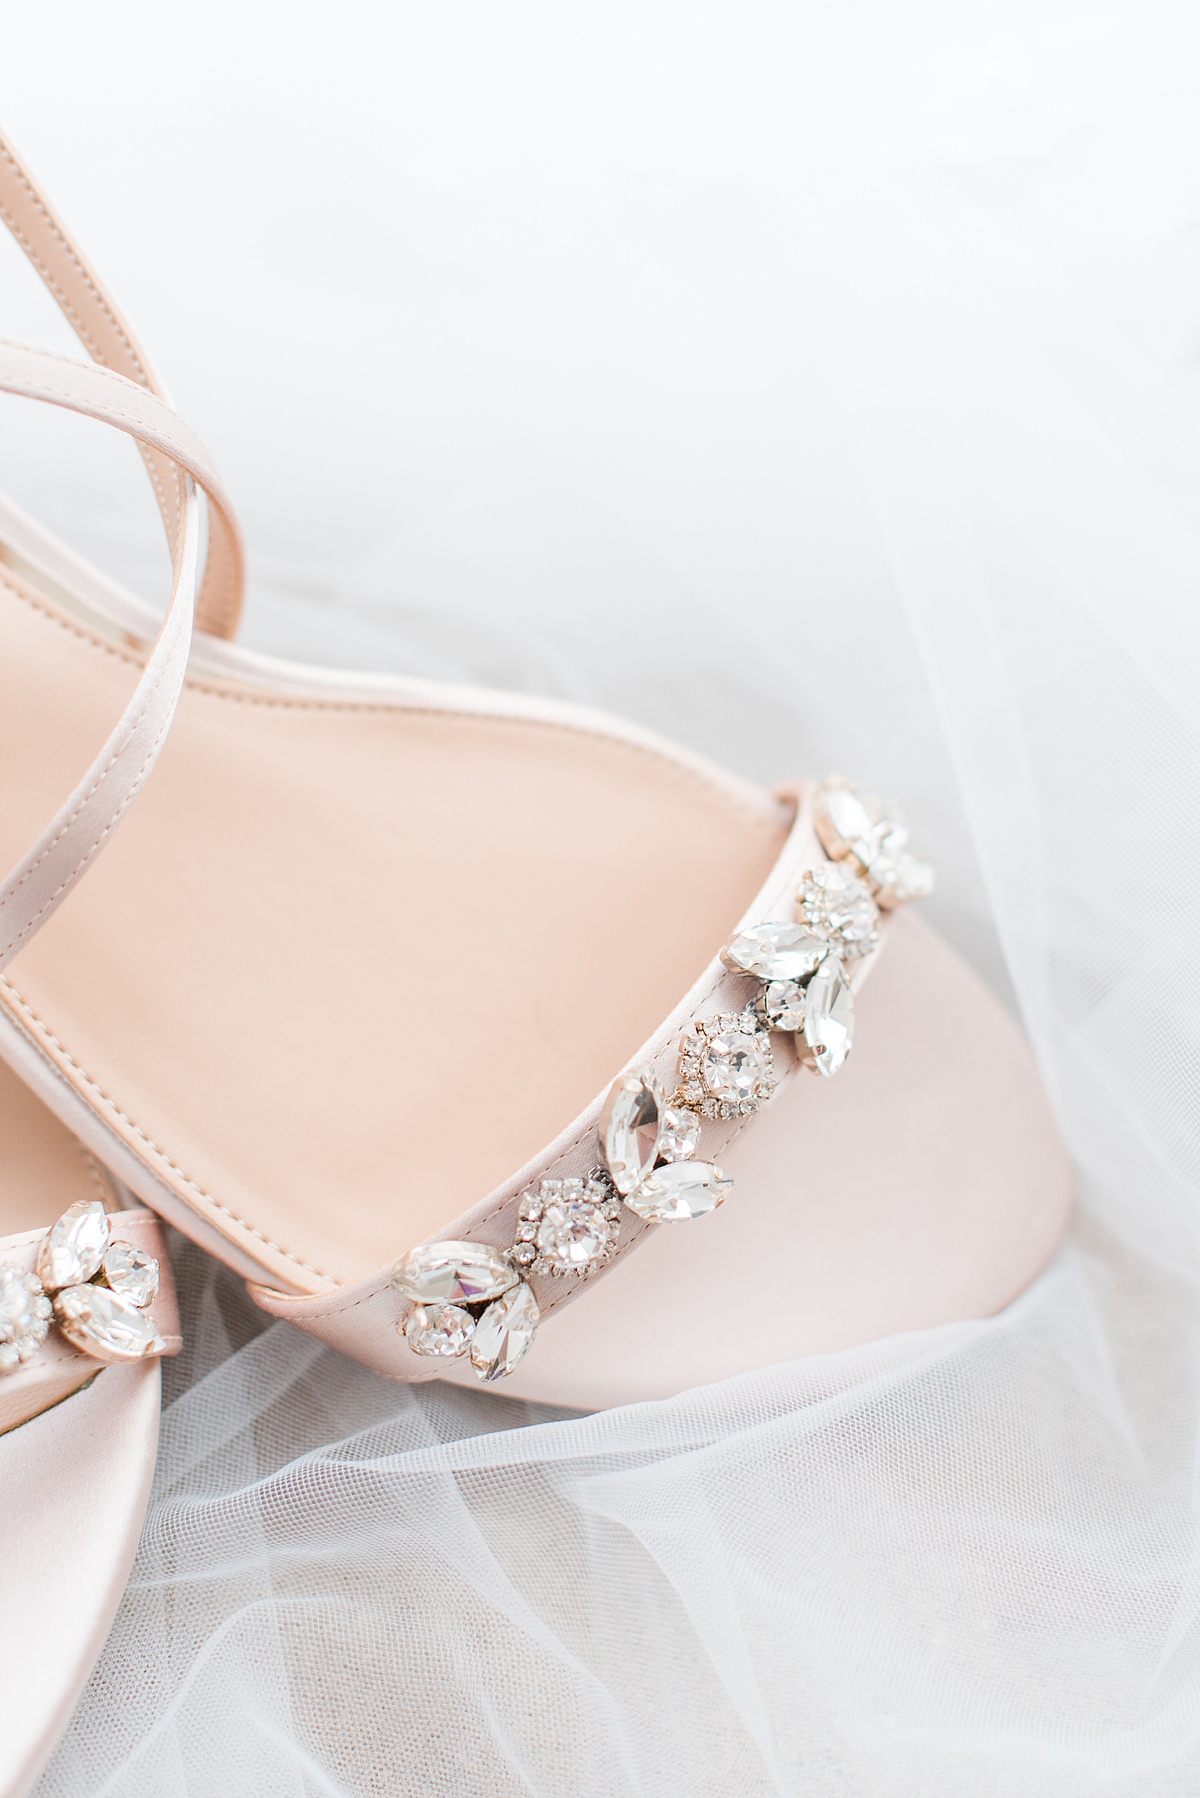 Bridal Details of Classic Jeweled Sandals at Grace Estate Winery Wedding. Wedding Photography by Richmond Wedding Photographer Kailey Brianne Photography.